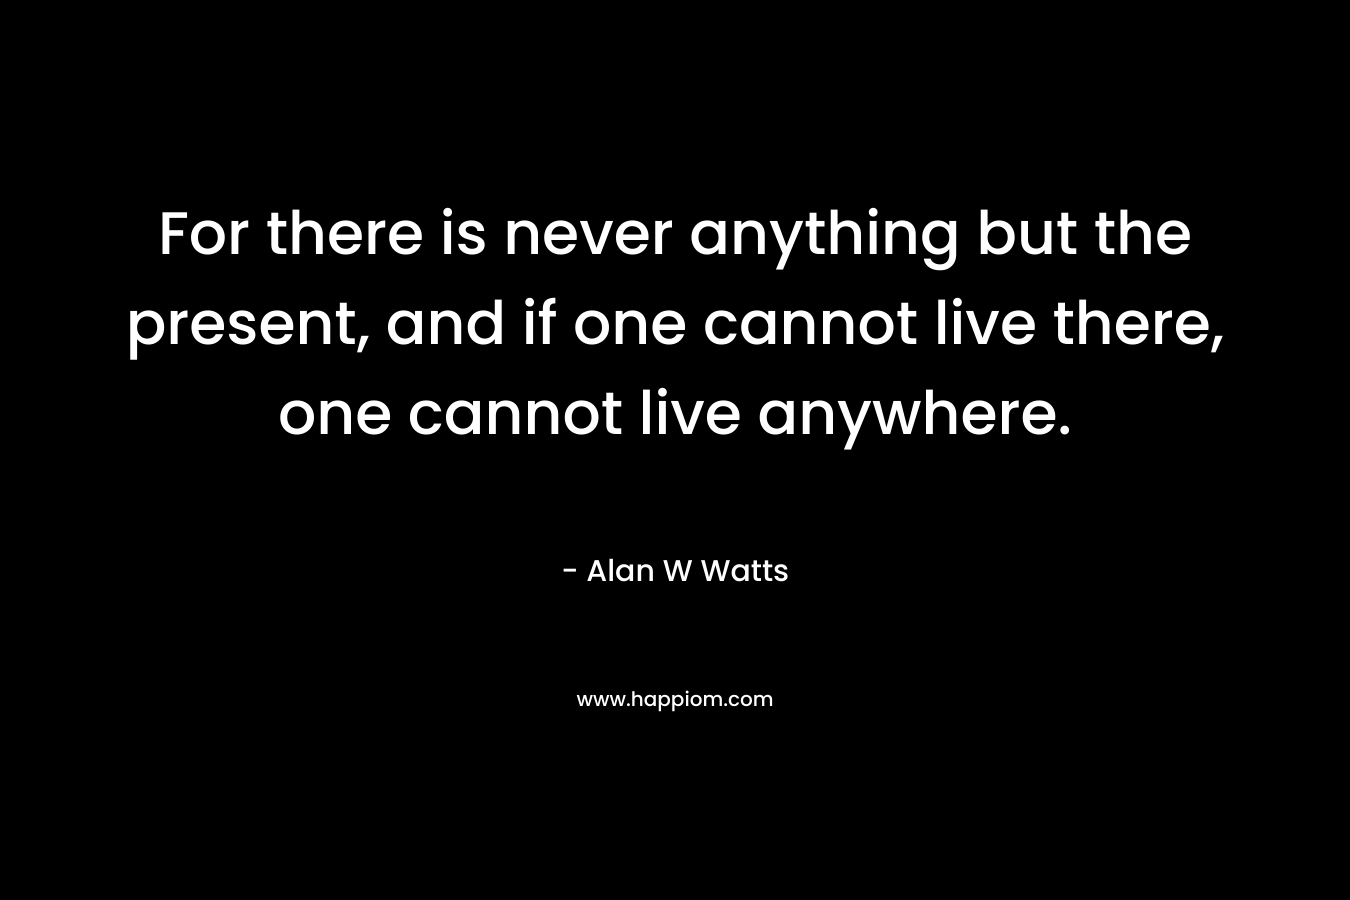 For there is never anything but the present, and if one cannot live there, one cannot live anywhere.